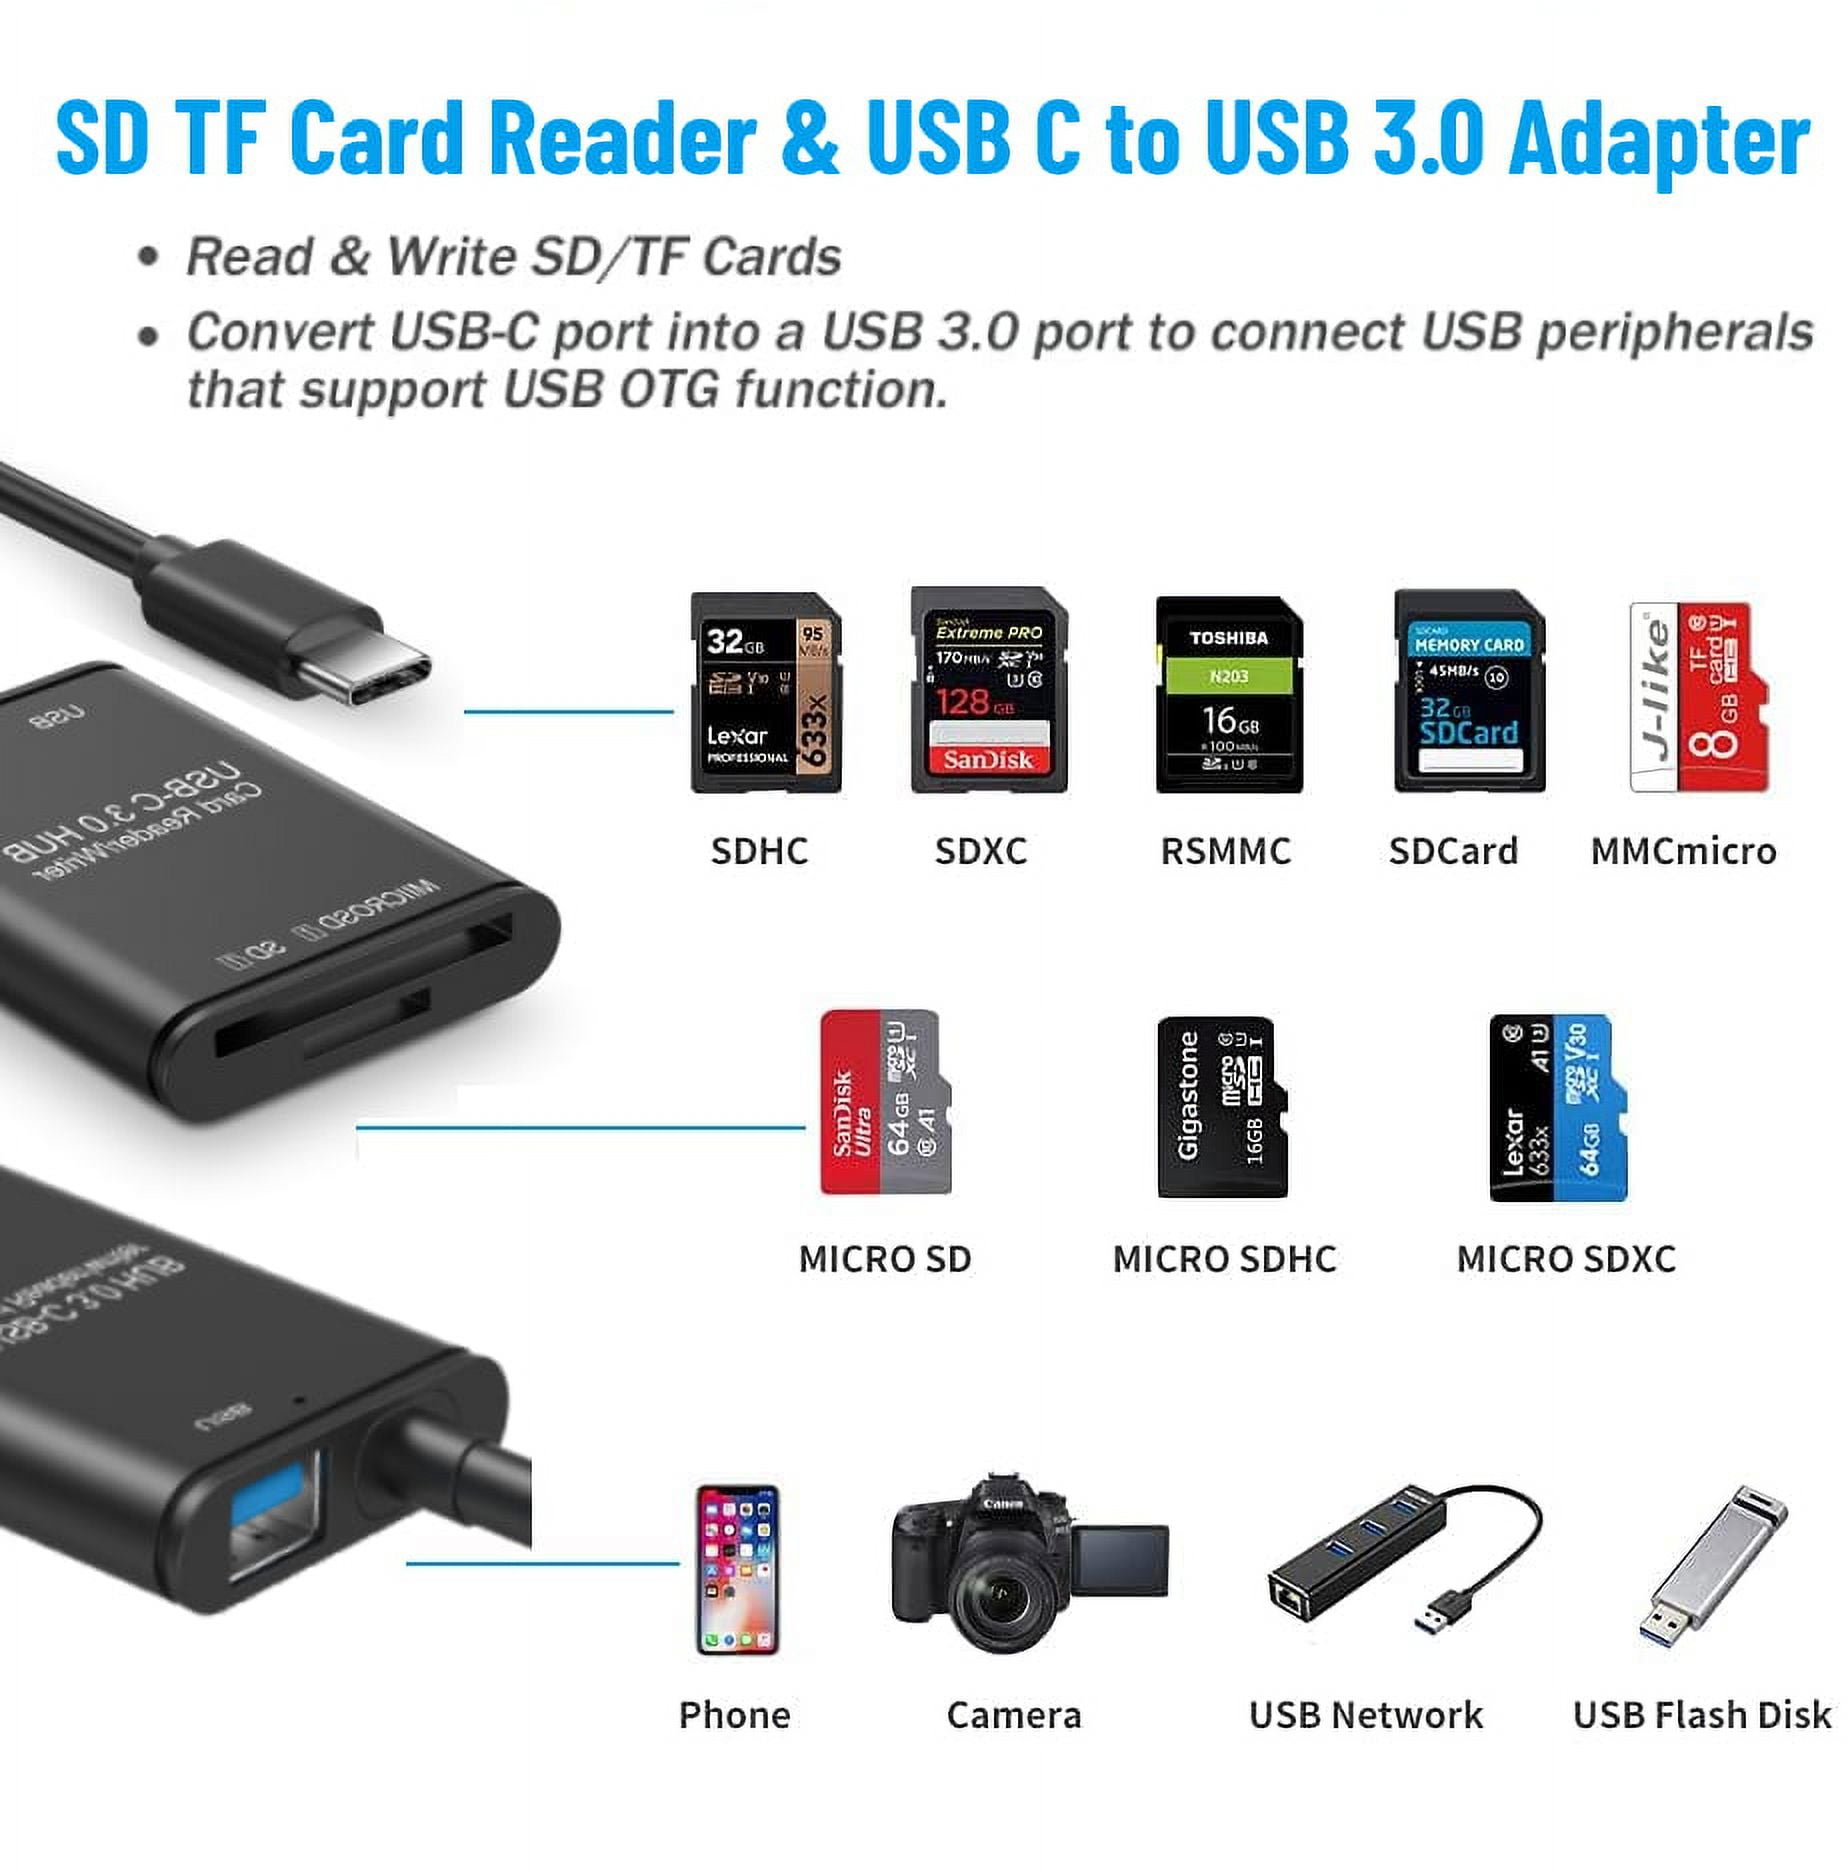 TSV 6-in-1 USB C SD Card Reader, Portable USB 3.0 Memory Card Reader Fit  for TF Card/Micro SD/SD/XD/CF/M2/MS, Camera Flash Card Reader, SD Card  Adapter Support Windows, Linux, Mac OS, Android 